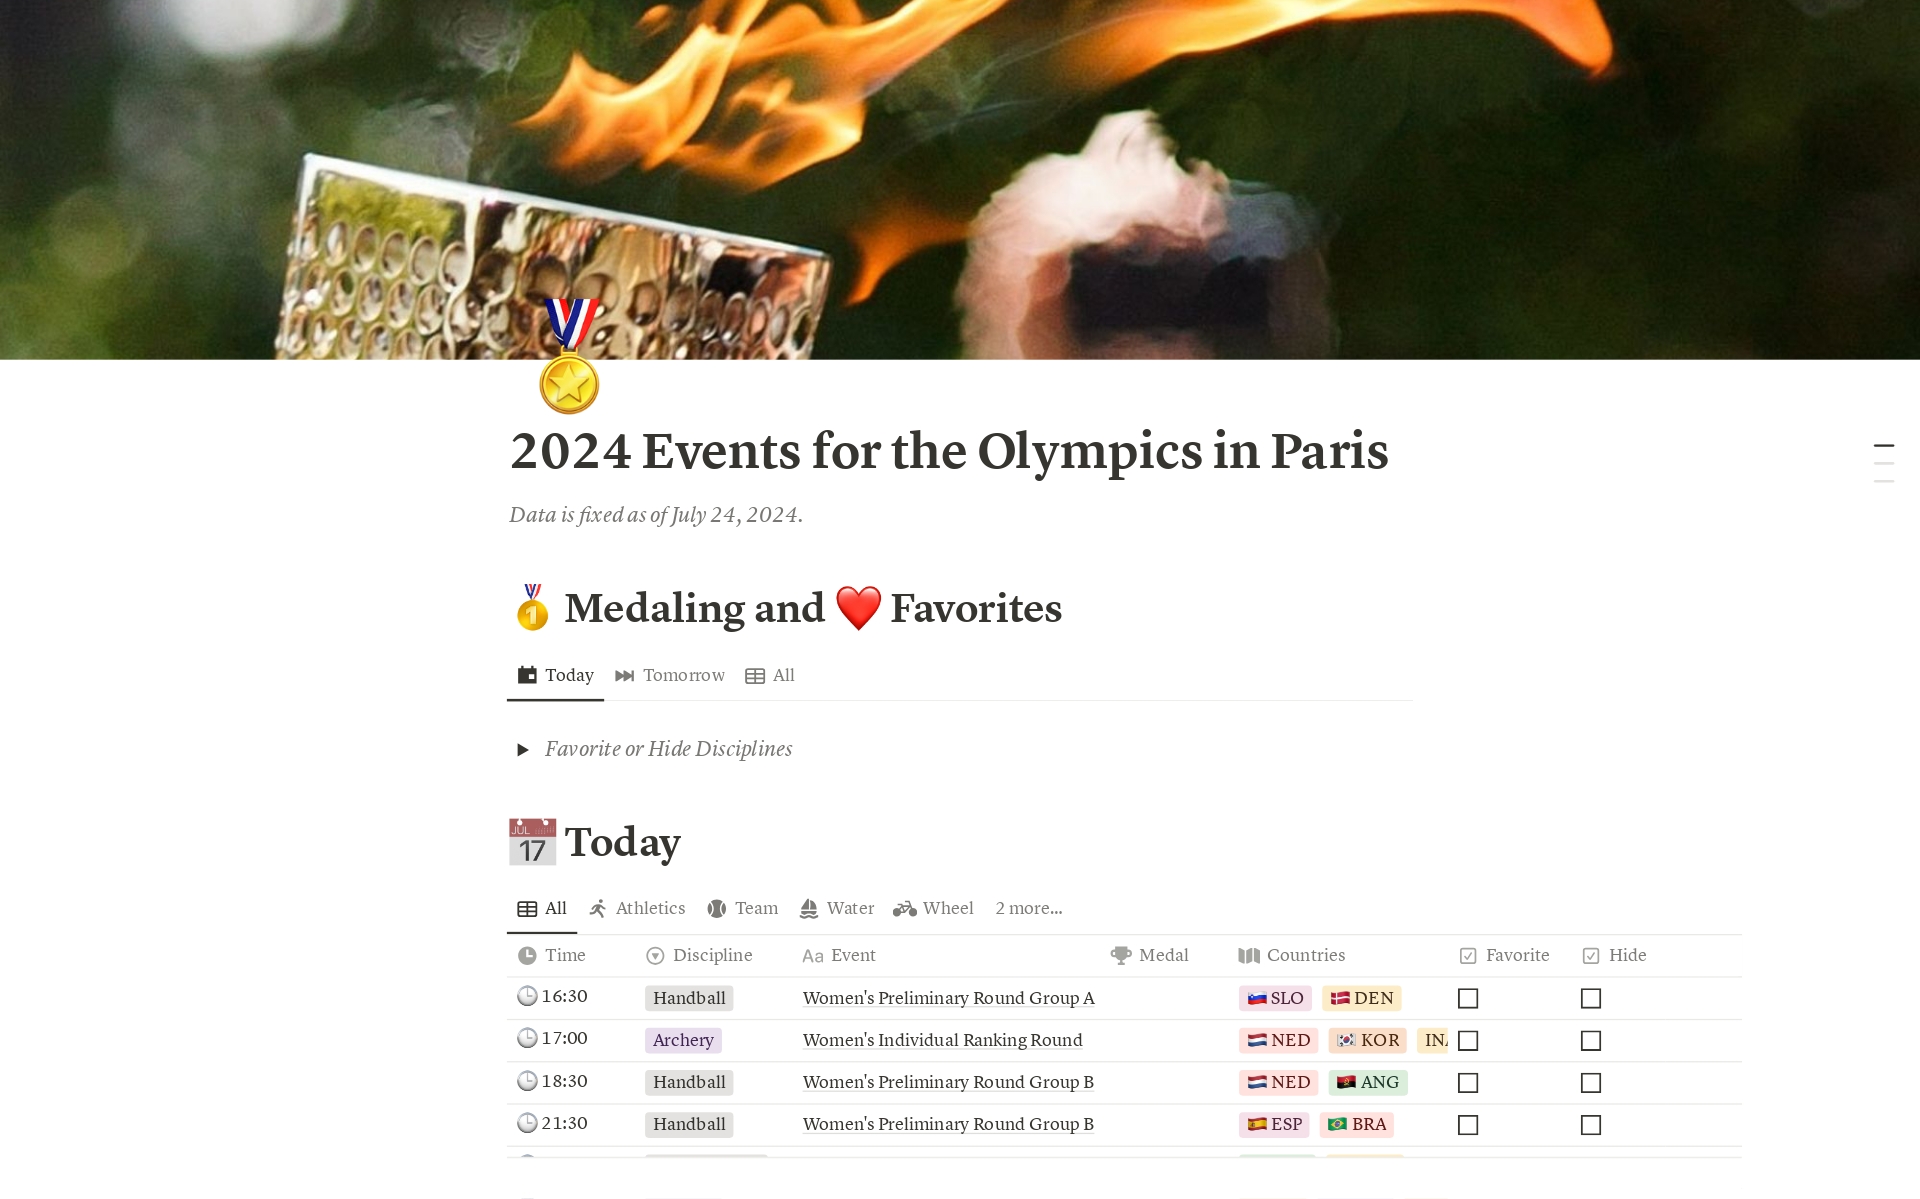 All Olympic events at Paris in 2024. In your Notion. Favorite or hide events so you don't miss out. Medaling events are front and center.